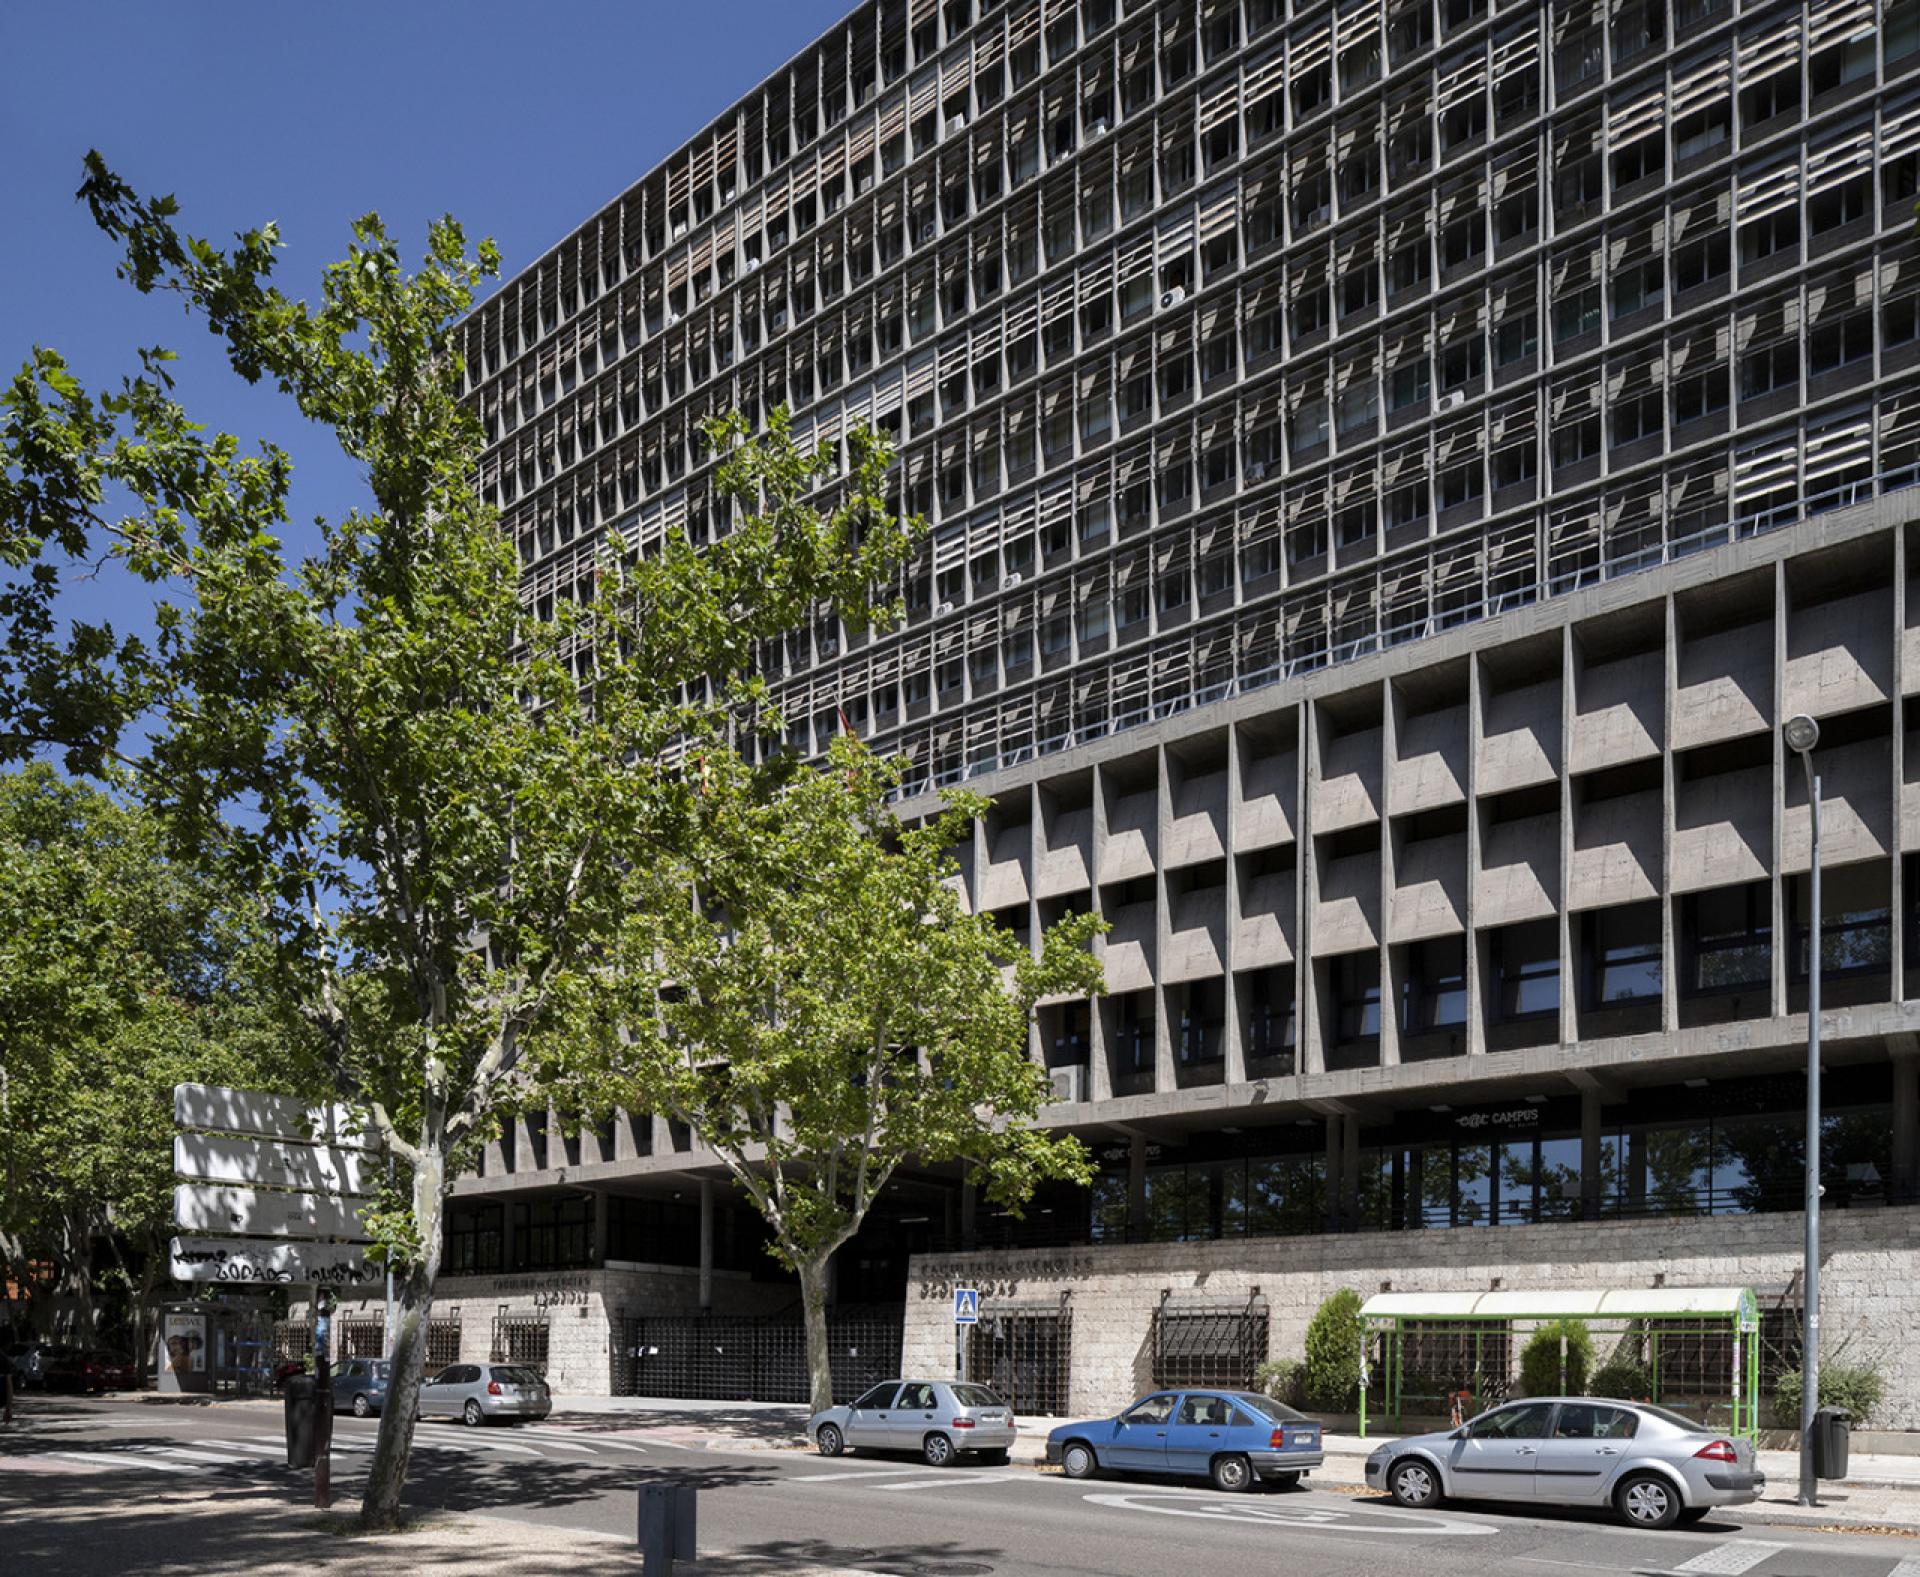 Department of Biological and Geological Sciences (Complutense University of Madrid) by Fernando Moreno Barberá (1964-1969)